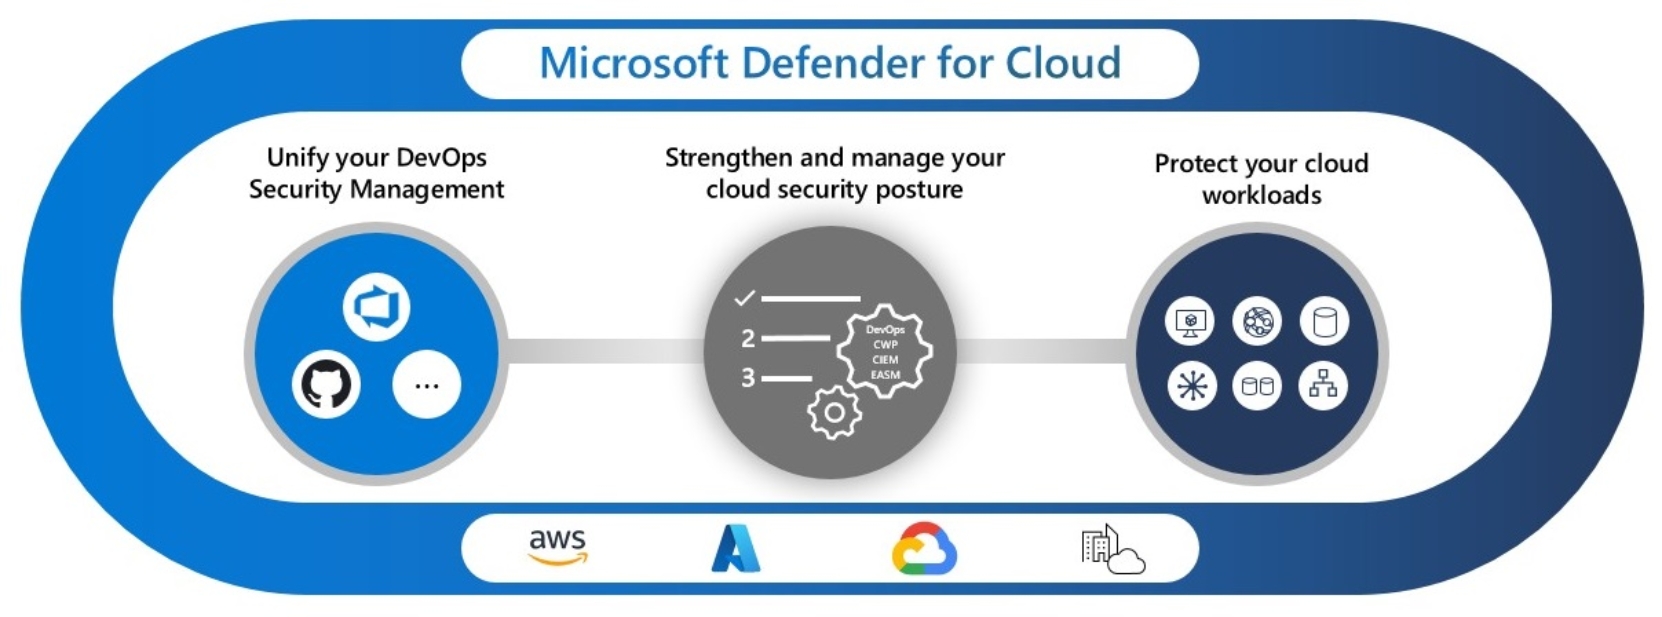 This figure shows how Microsoft Defender for Cloud integrates a multicloud approach for a unified security policy approach